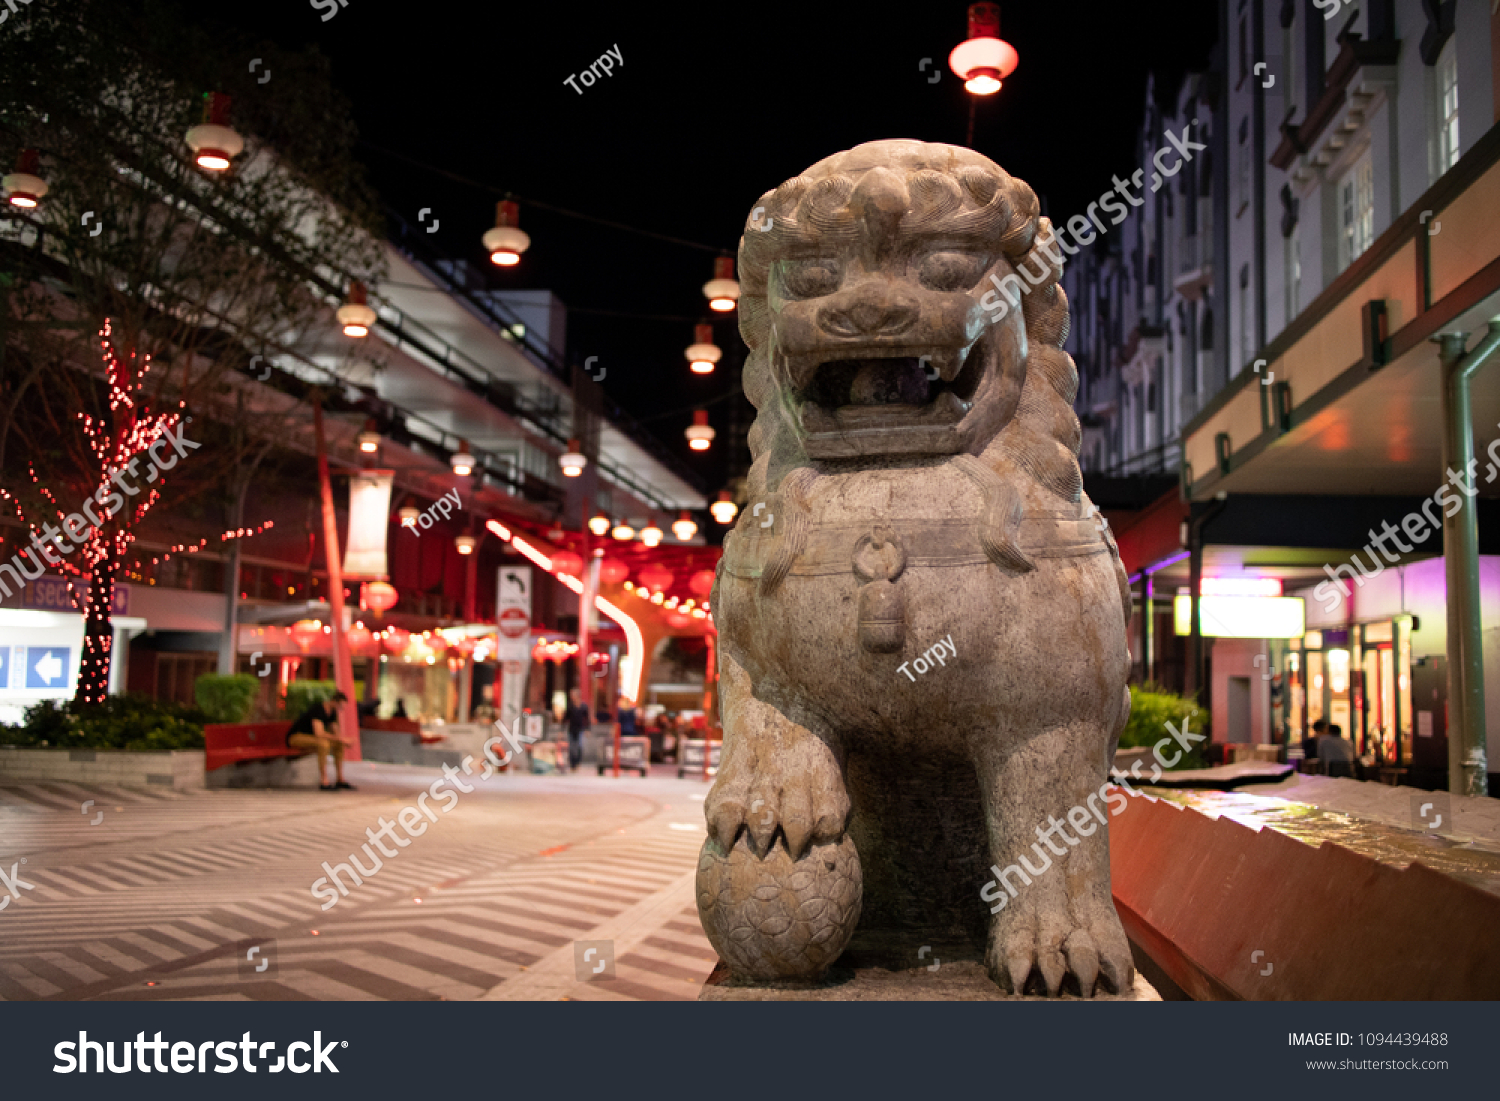 Chinese Guardian Lion in Chinatown, Fortitude Valley, Brisbane #1094439488